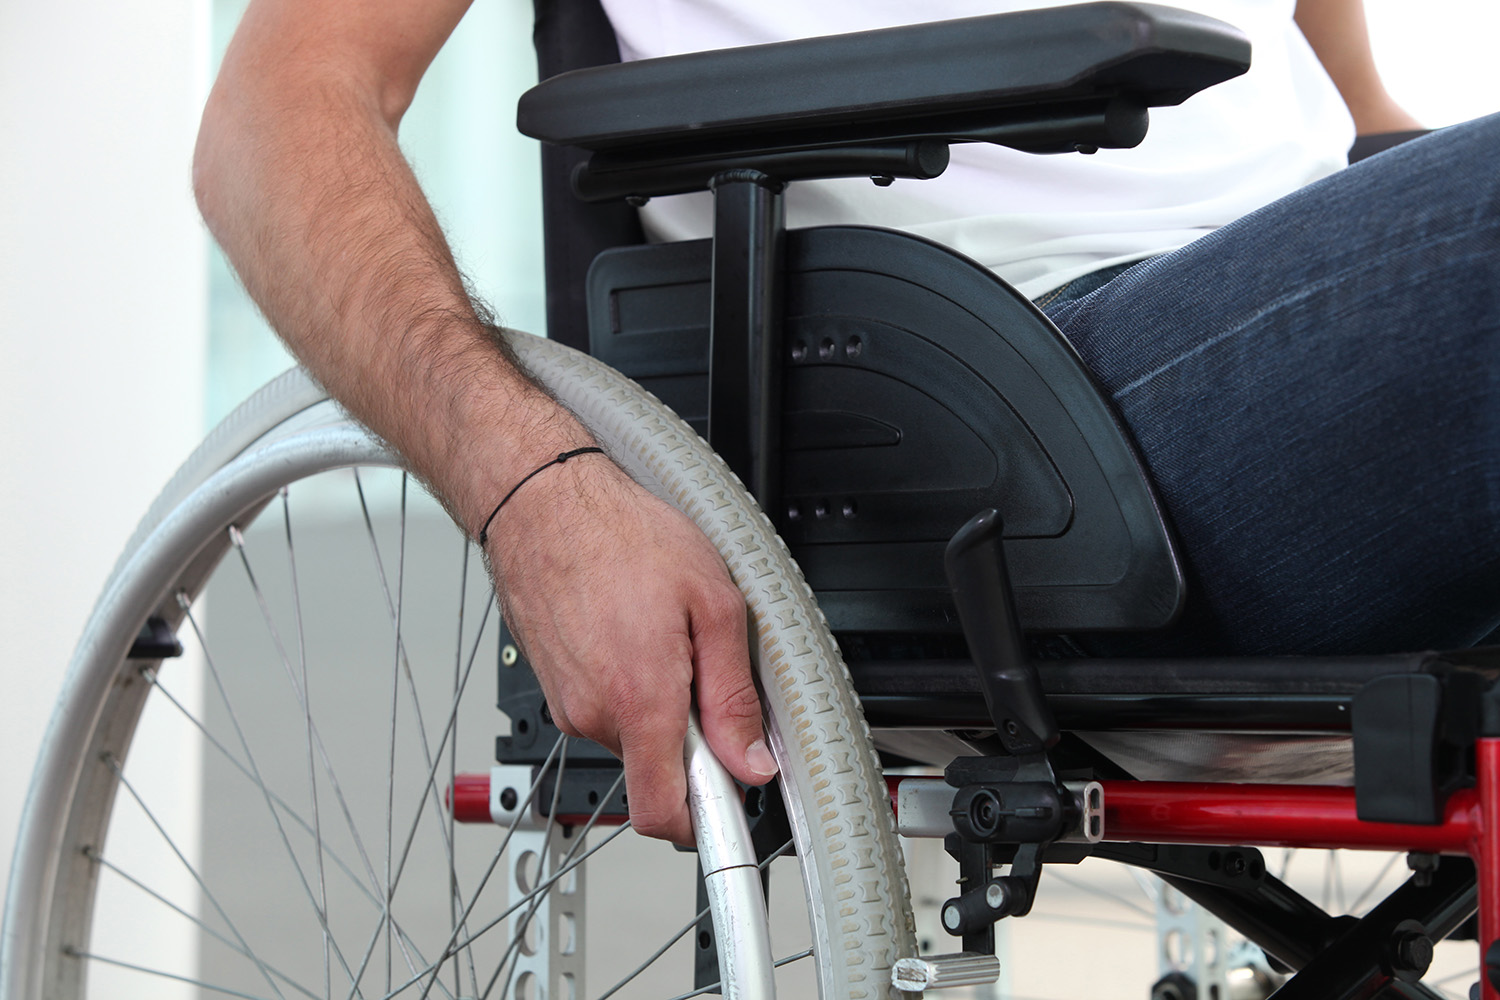 Closeup of a man's hand on the wheel of his wheelchair